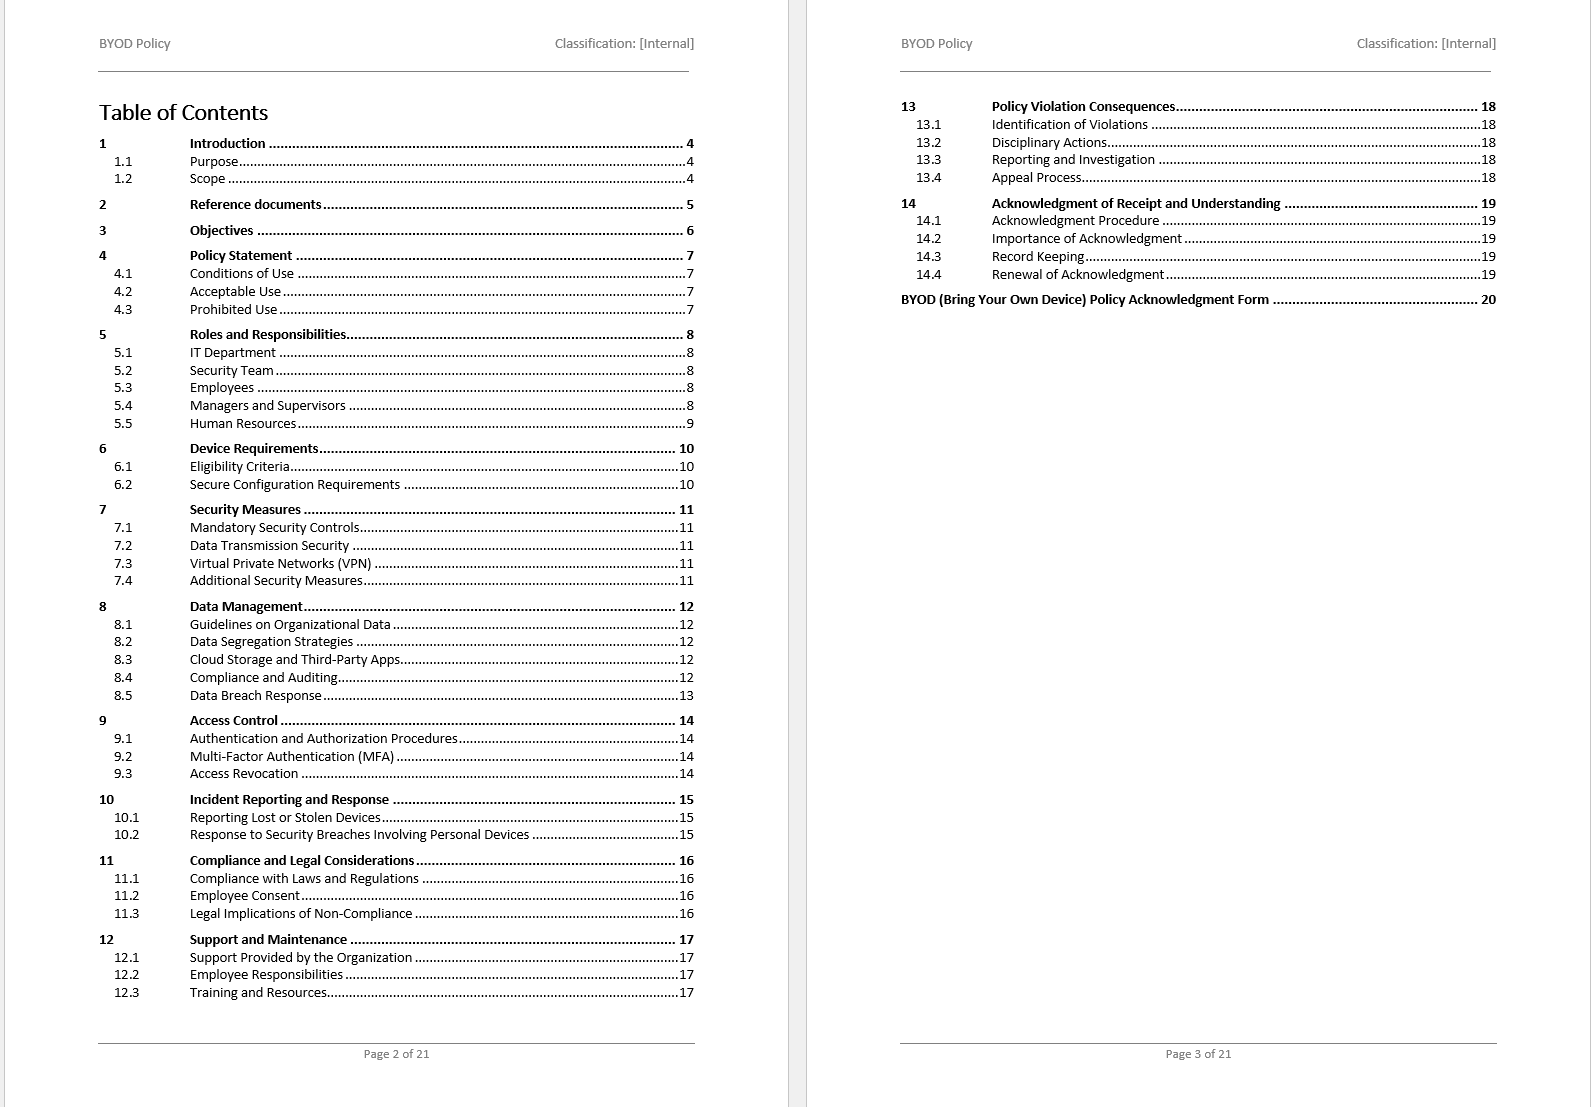 BOYD Table of contents